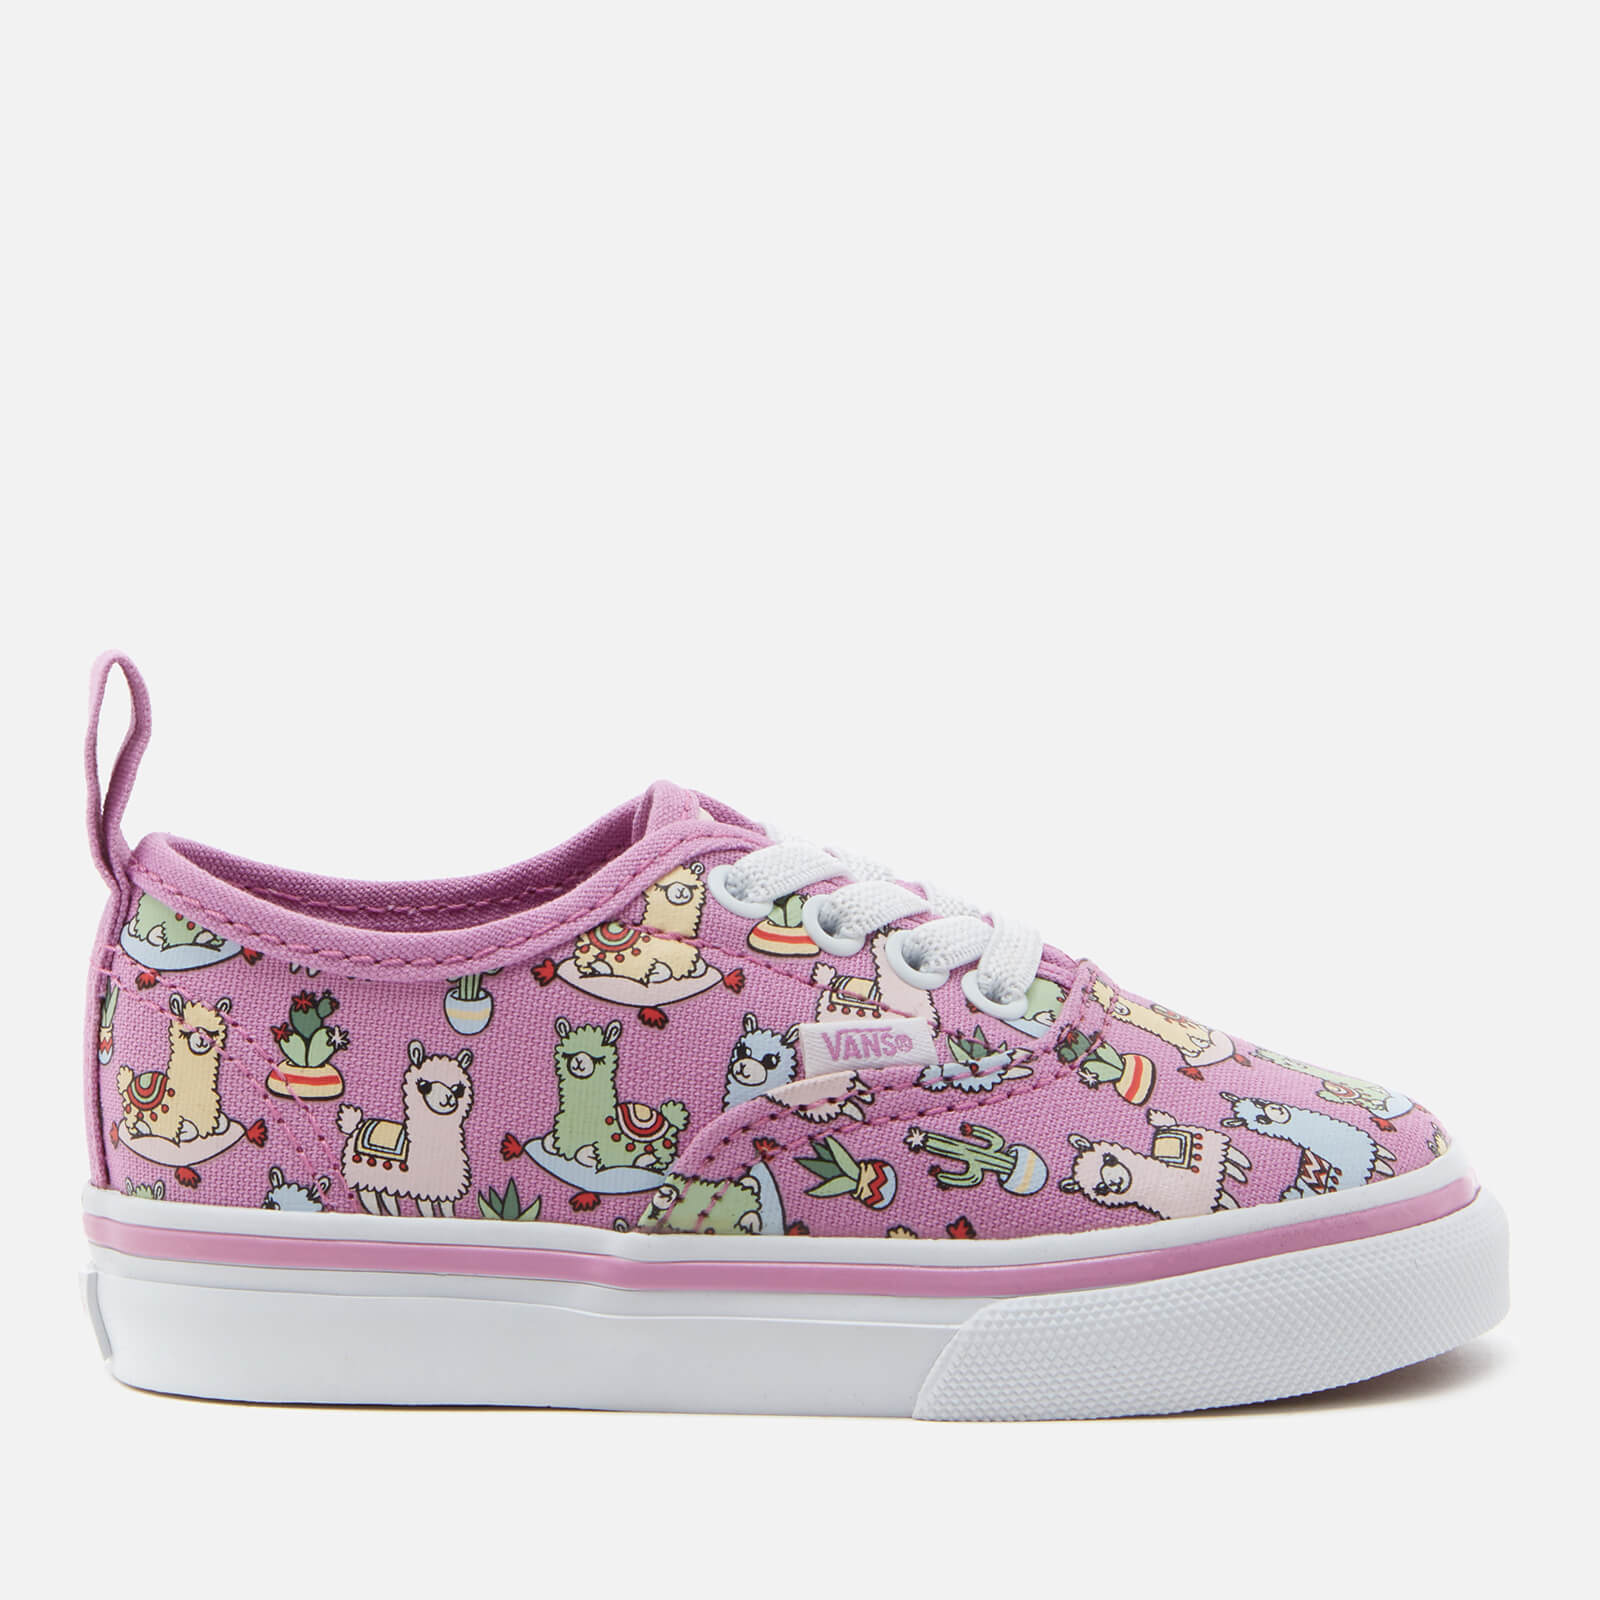 Vans Toddlers' Elastic Lace Llama Trainers - Orchid - UK 2 Baby